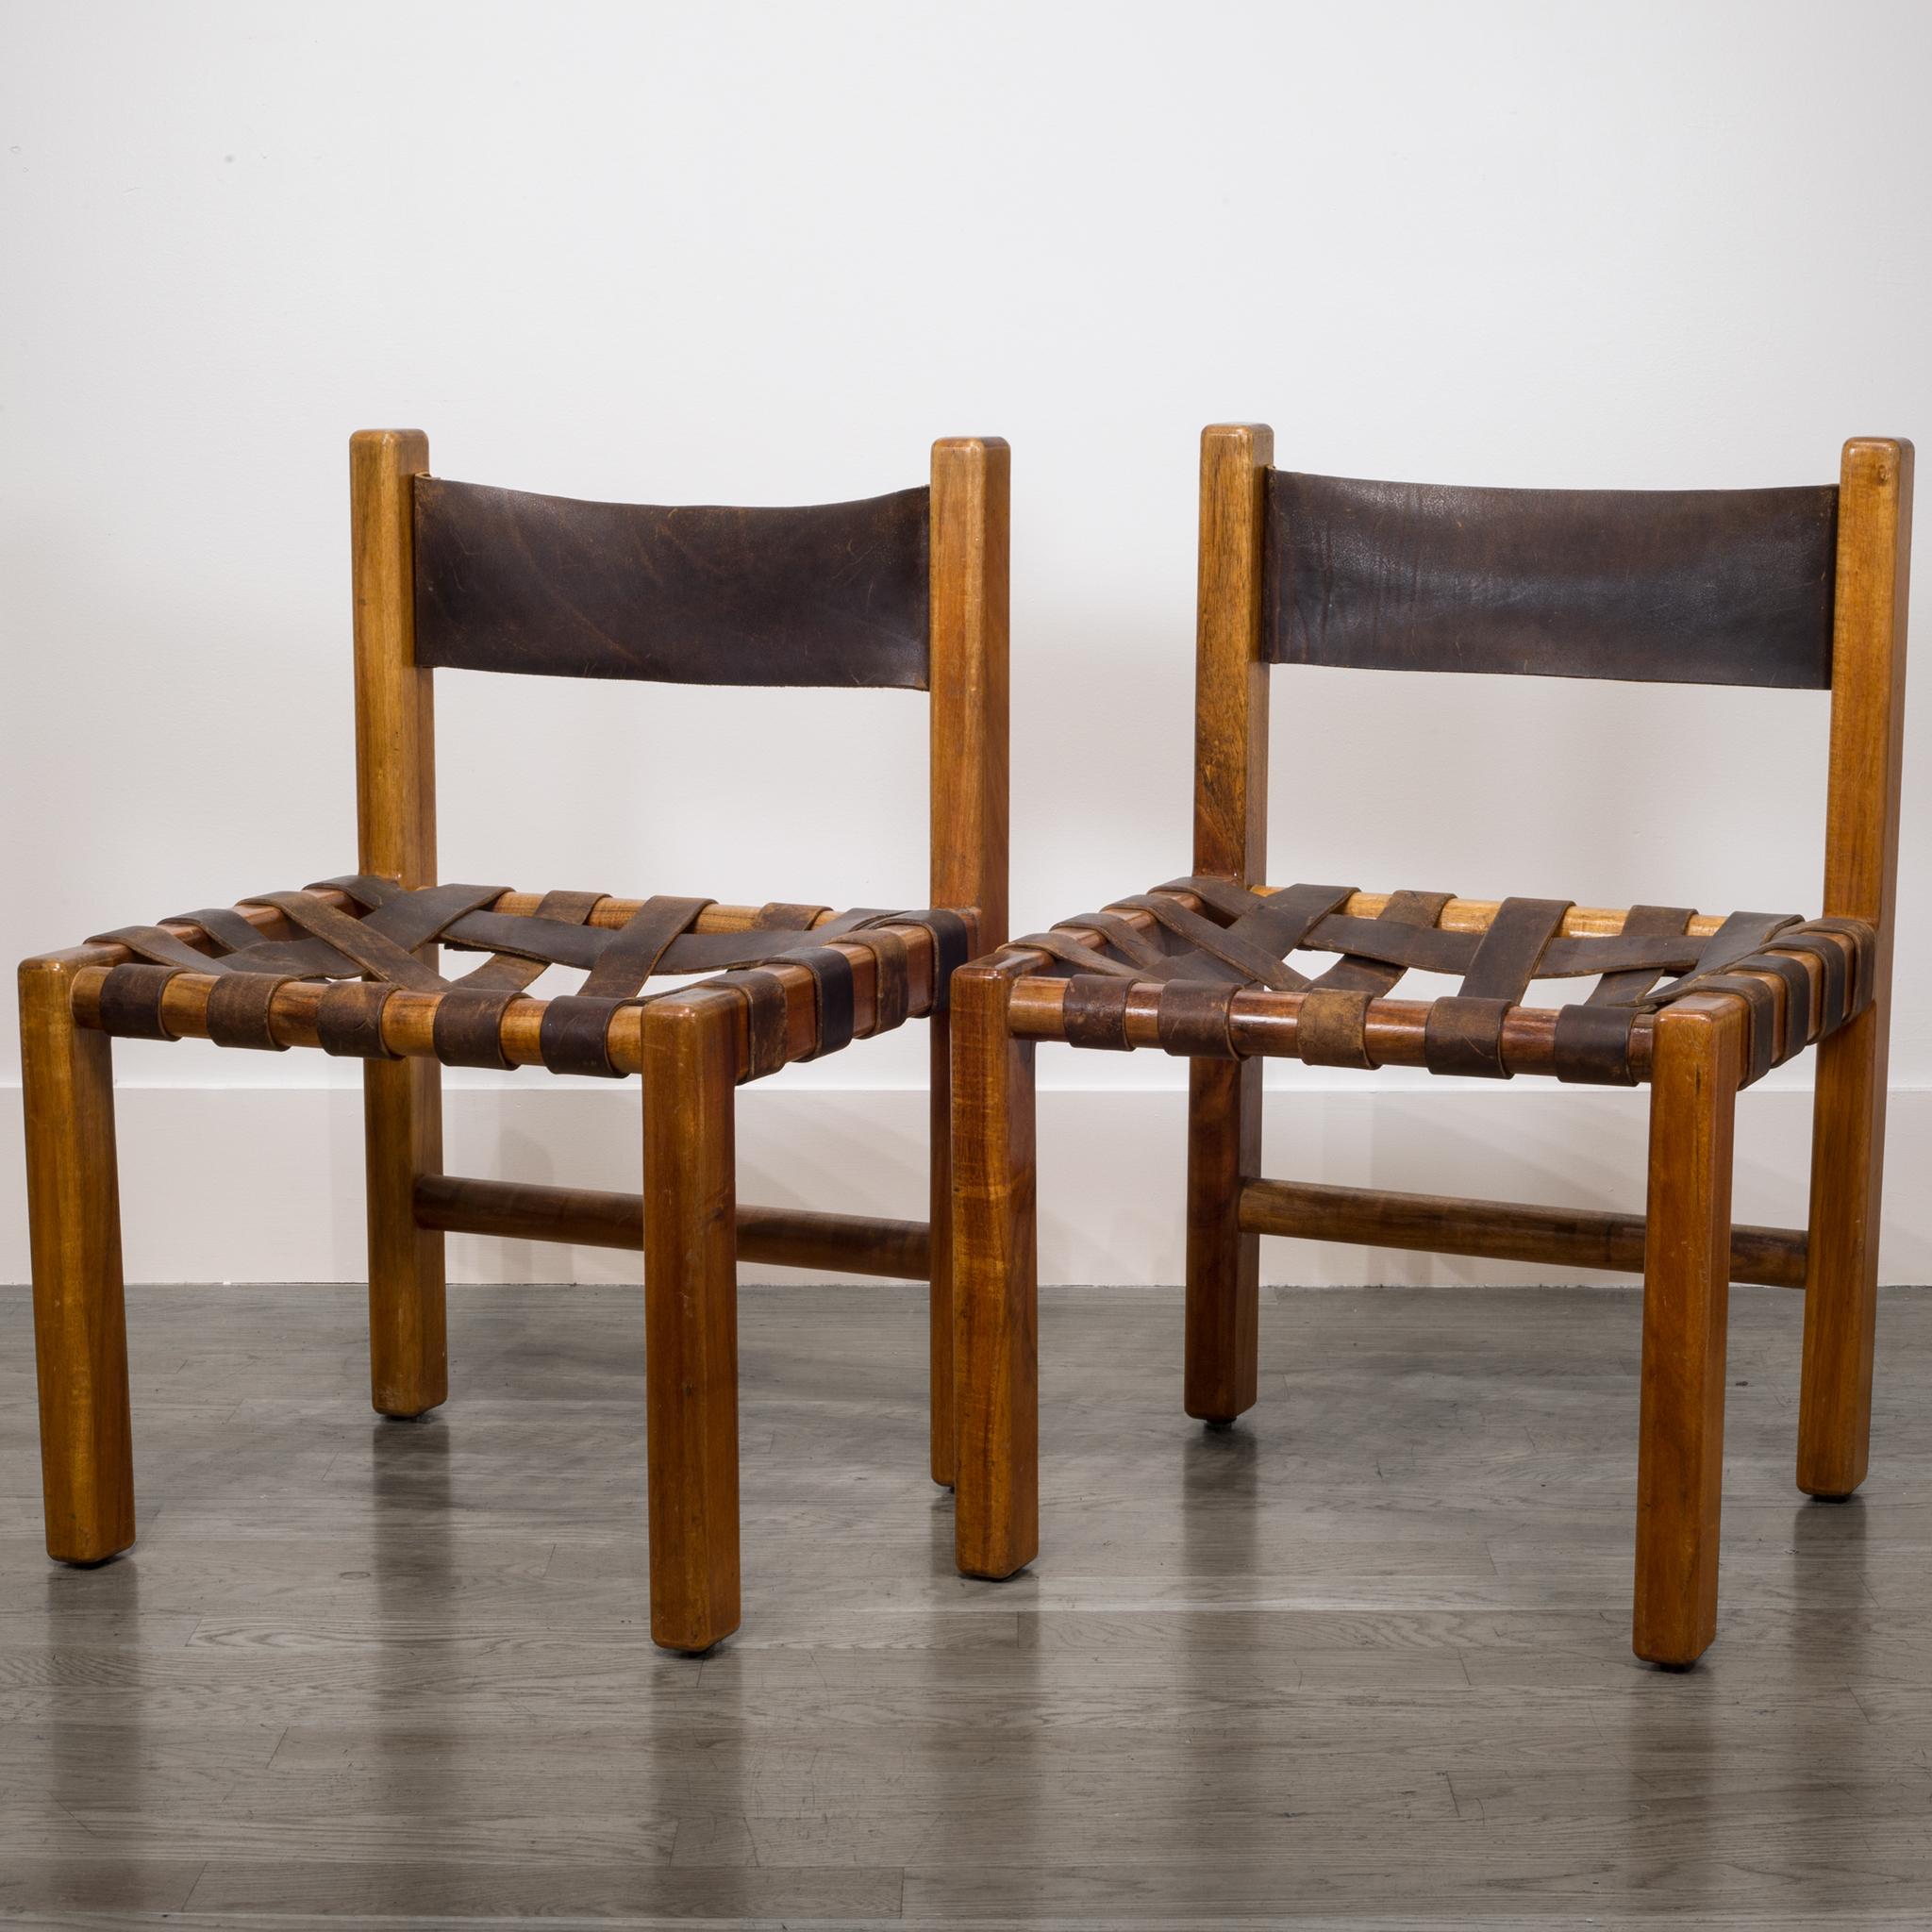 A set of two studio crafted chairs, made of a sturdy koawood frame with rounded corners. The backrest and seating are made of a red-brown leather with a beautiful and heavy patina. The back is made of one piece of leather and the seating is webbed.